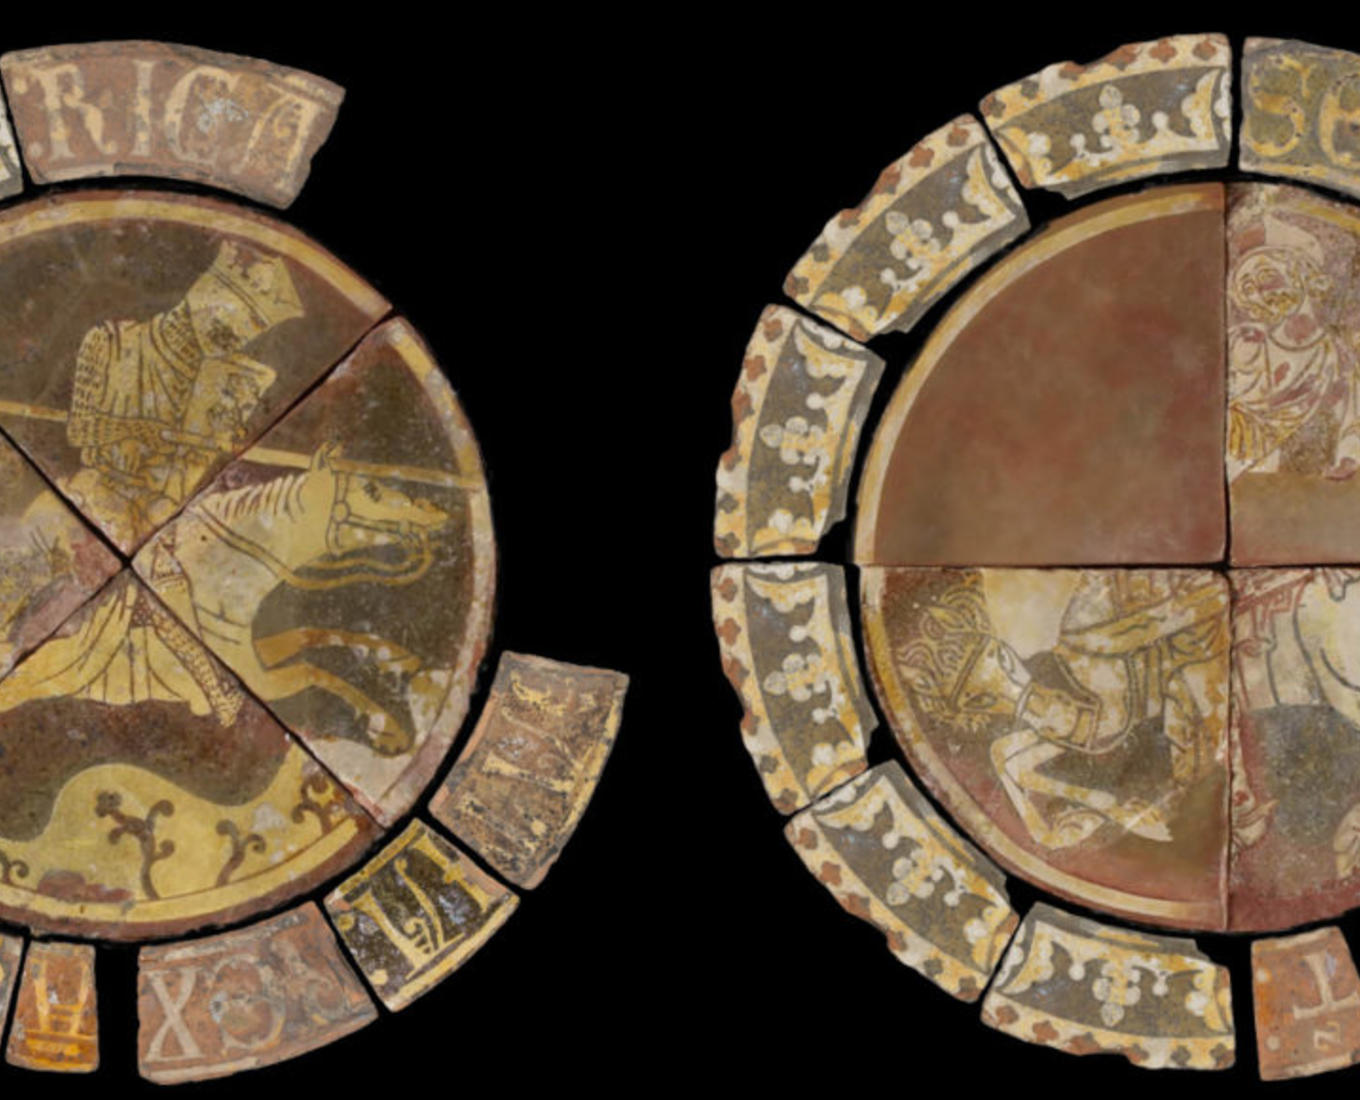 Richard and Saladin with Latin text surrounds; combat series Chertsey tiles, c. 1250-1300, England, (British Museum, earthenware floor tiles, lead-glazed with inlaid slip decoration).